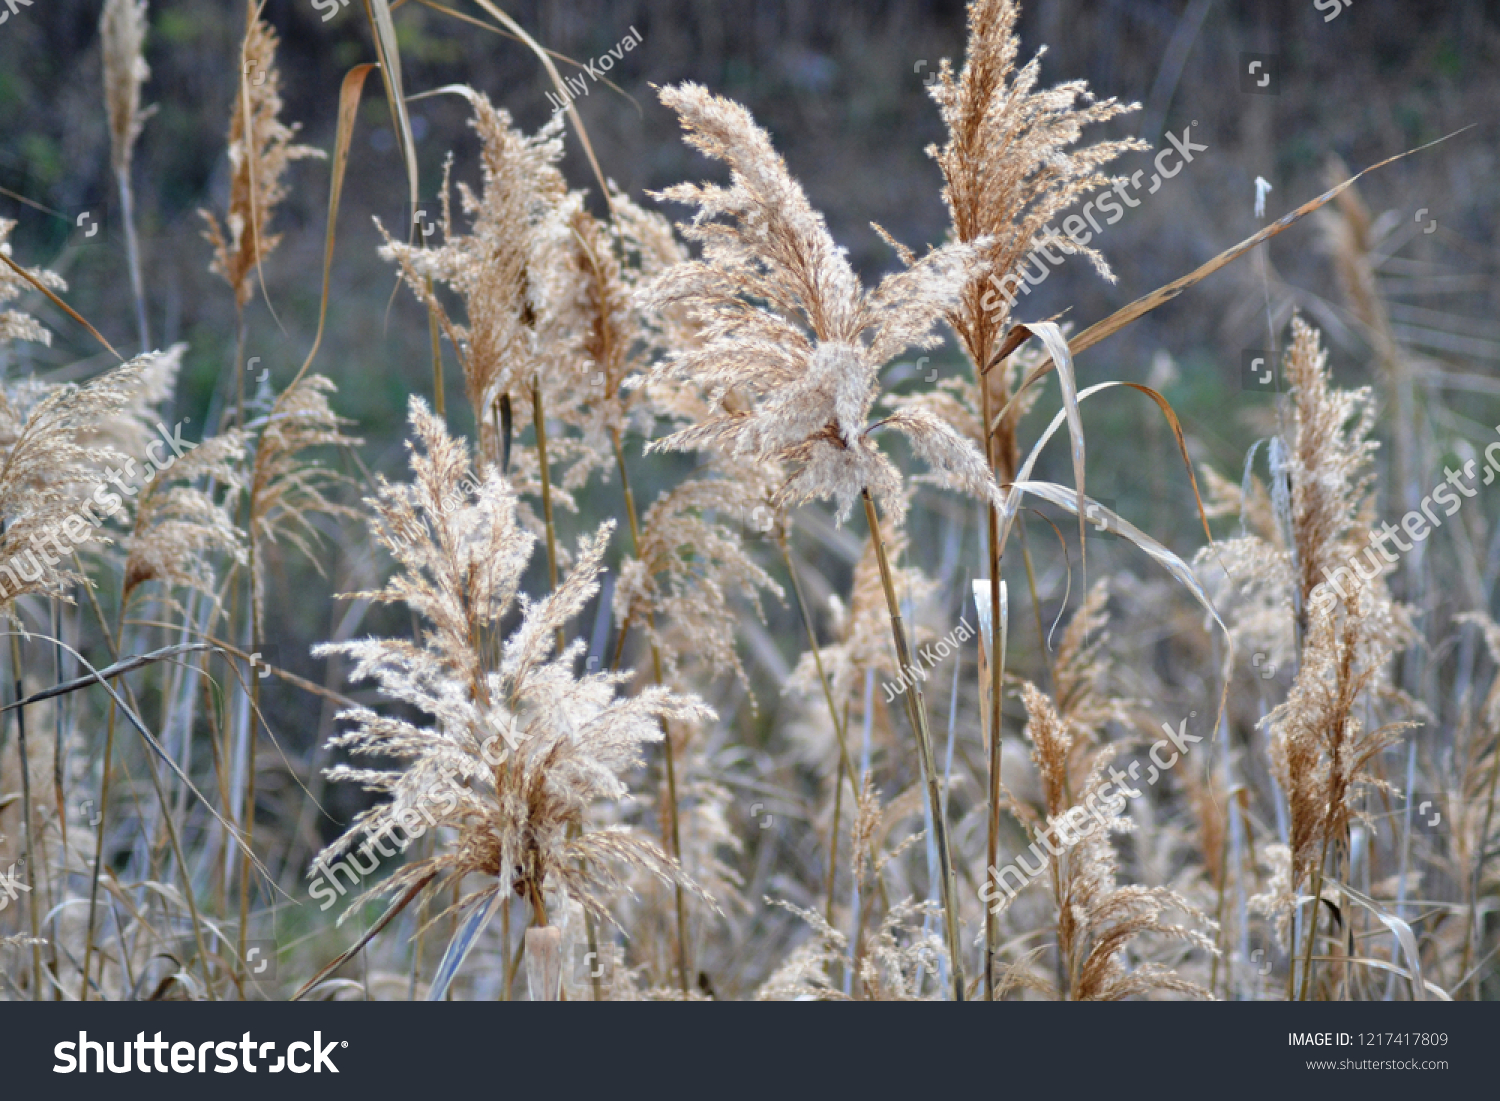 Dry reed on the lake, reed layer, reed seeds. Golden reed grass in the fall in the sun. Abstract natural background. Closeup image #1217417809